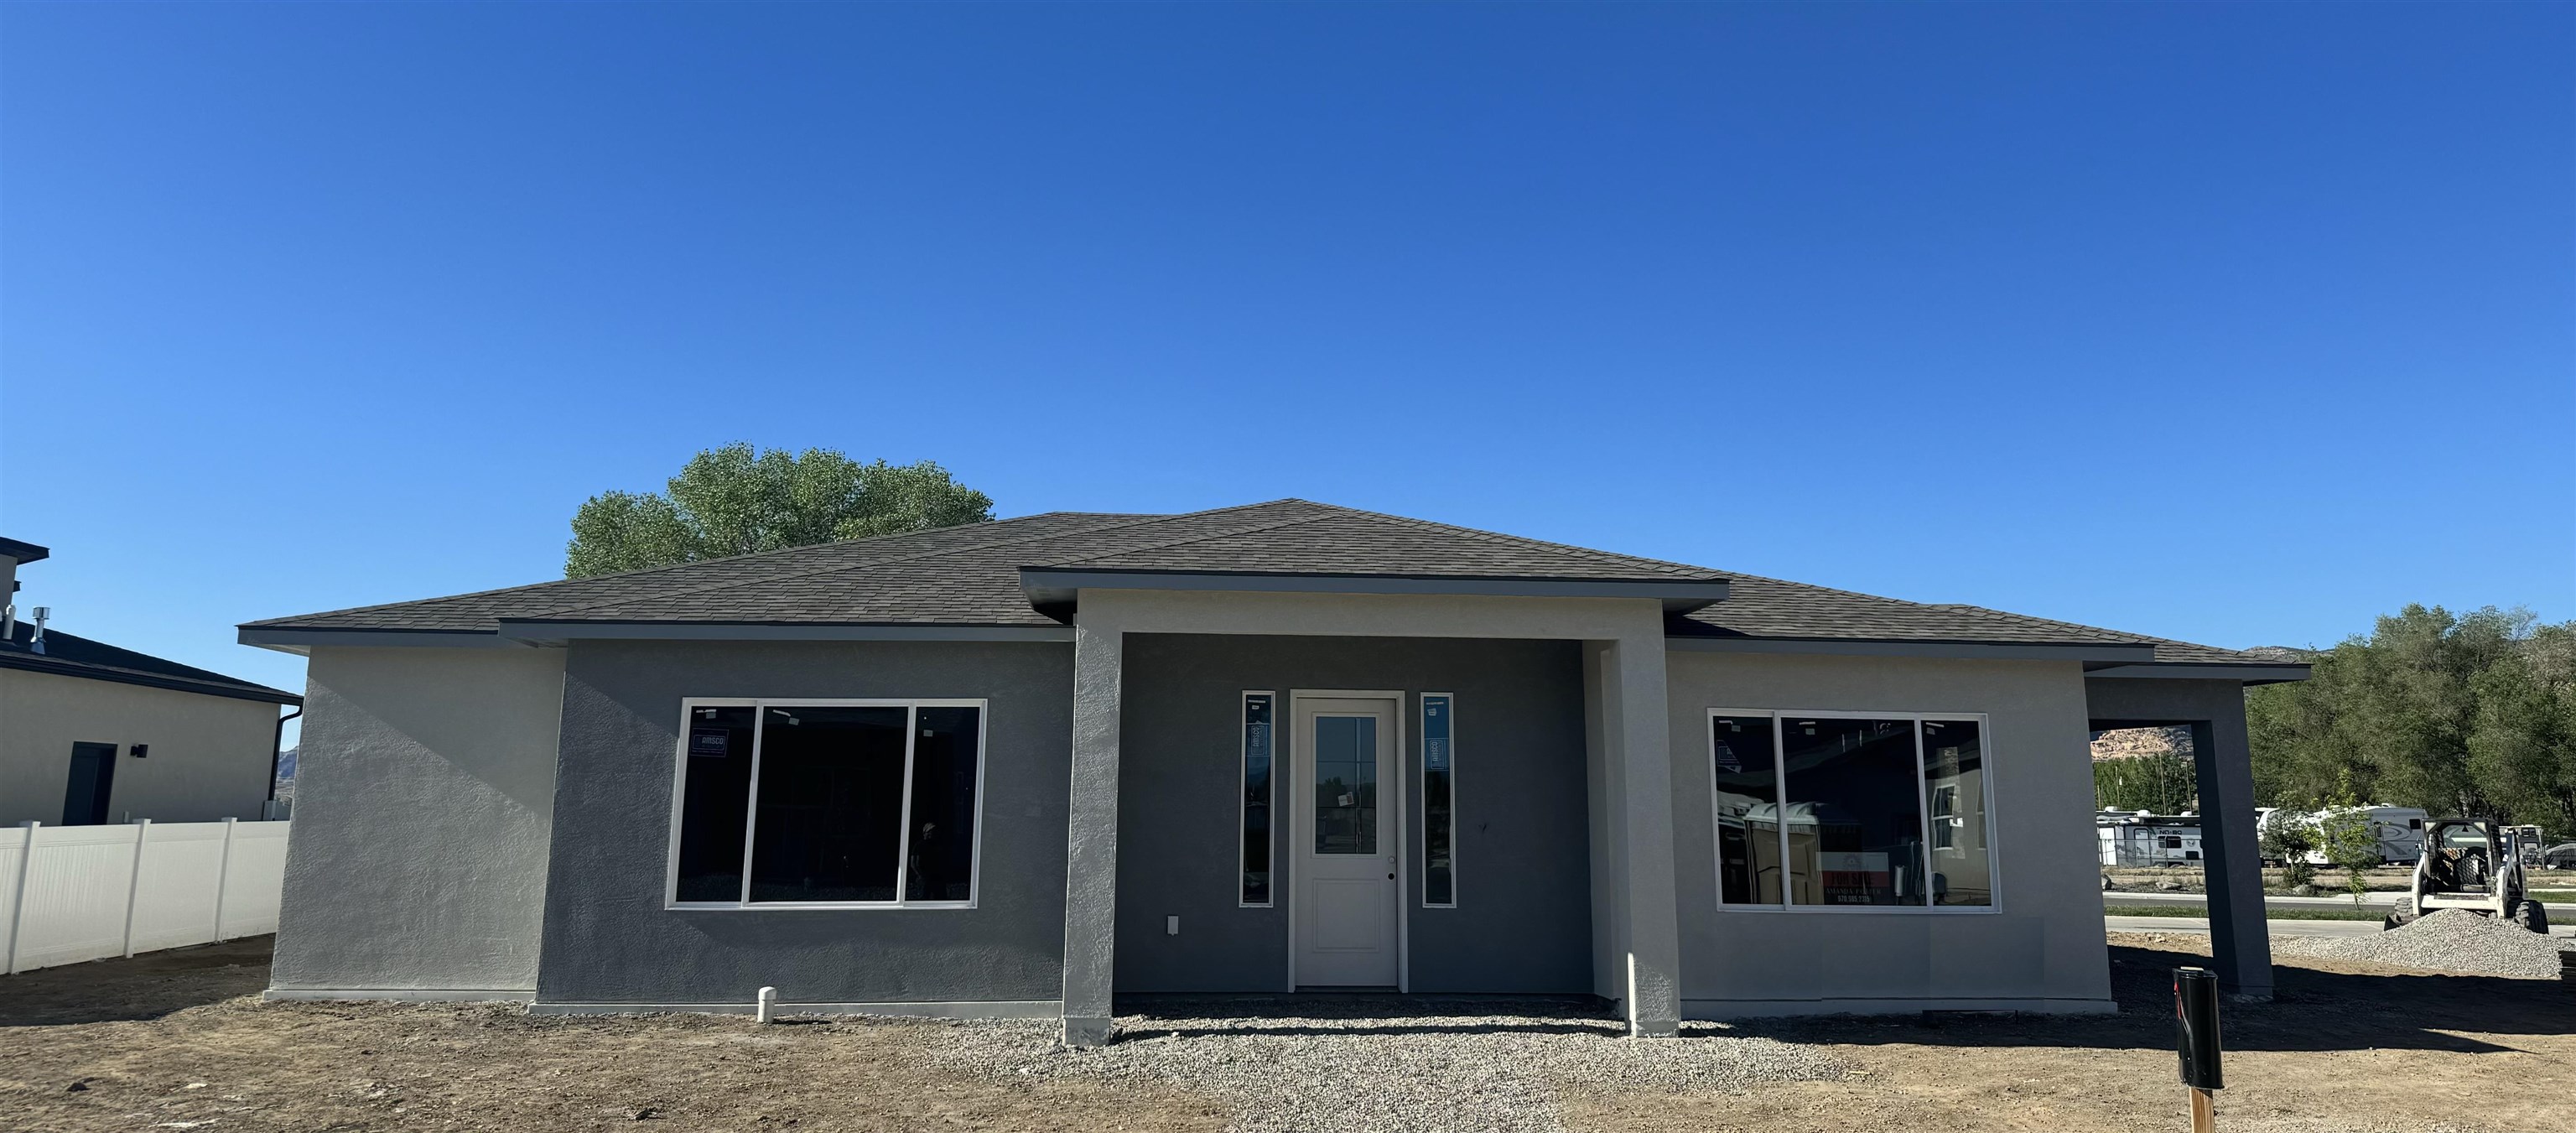 This home has a beautiful open concept floorplan. It has 3 bedrooms, 2 baths, and a 2 car garage and is located in the heart of Fruita's Iron Wheel Subdivision. This property will come fully landscaped front and back with vinyl privacy fencing. You'll enjoy the convenience of nearby parks, schools, and the charming amenities of downtown Fruita.